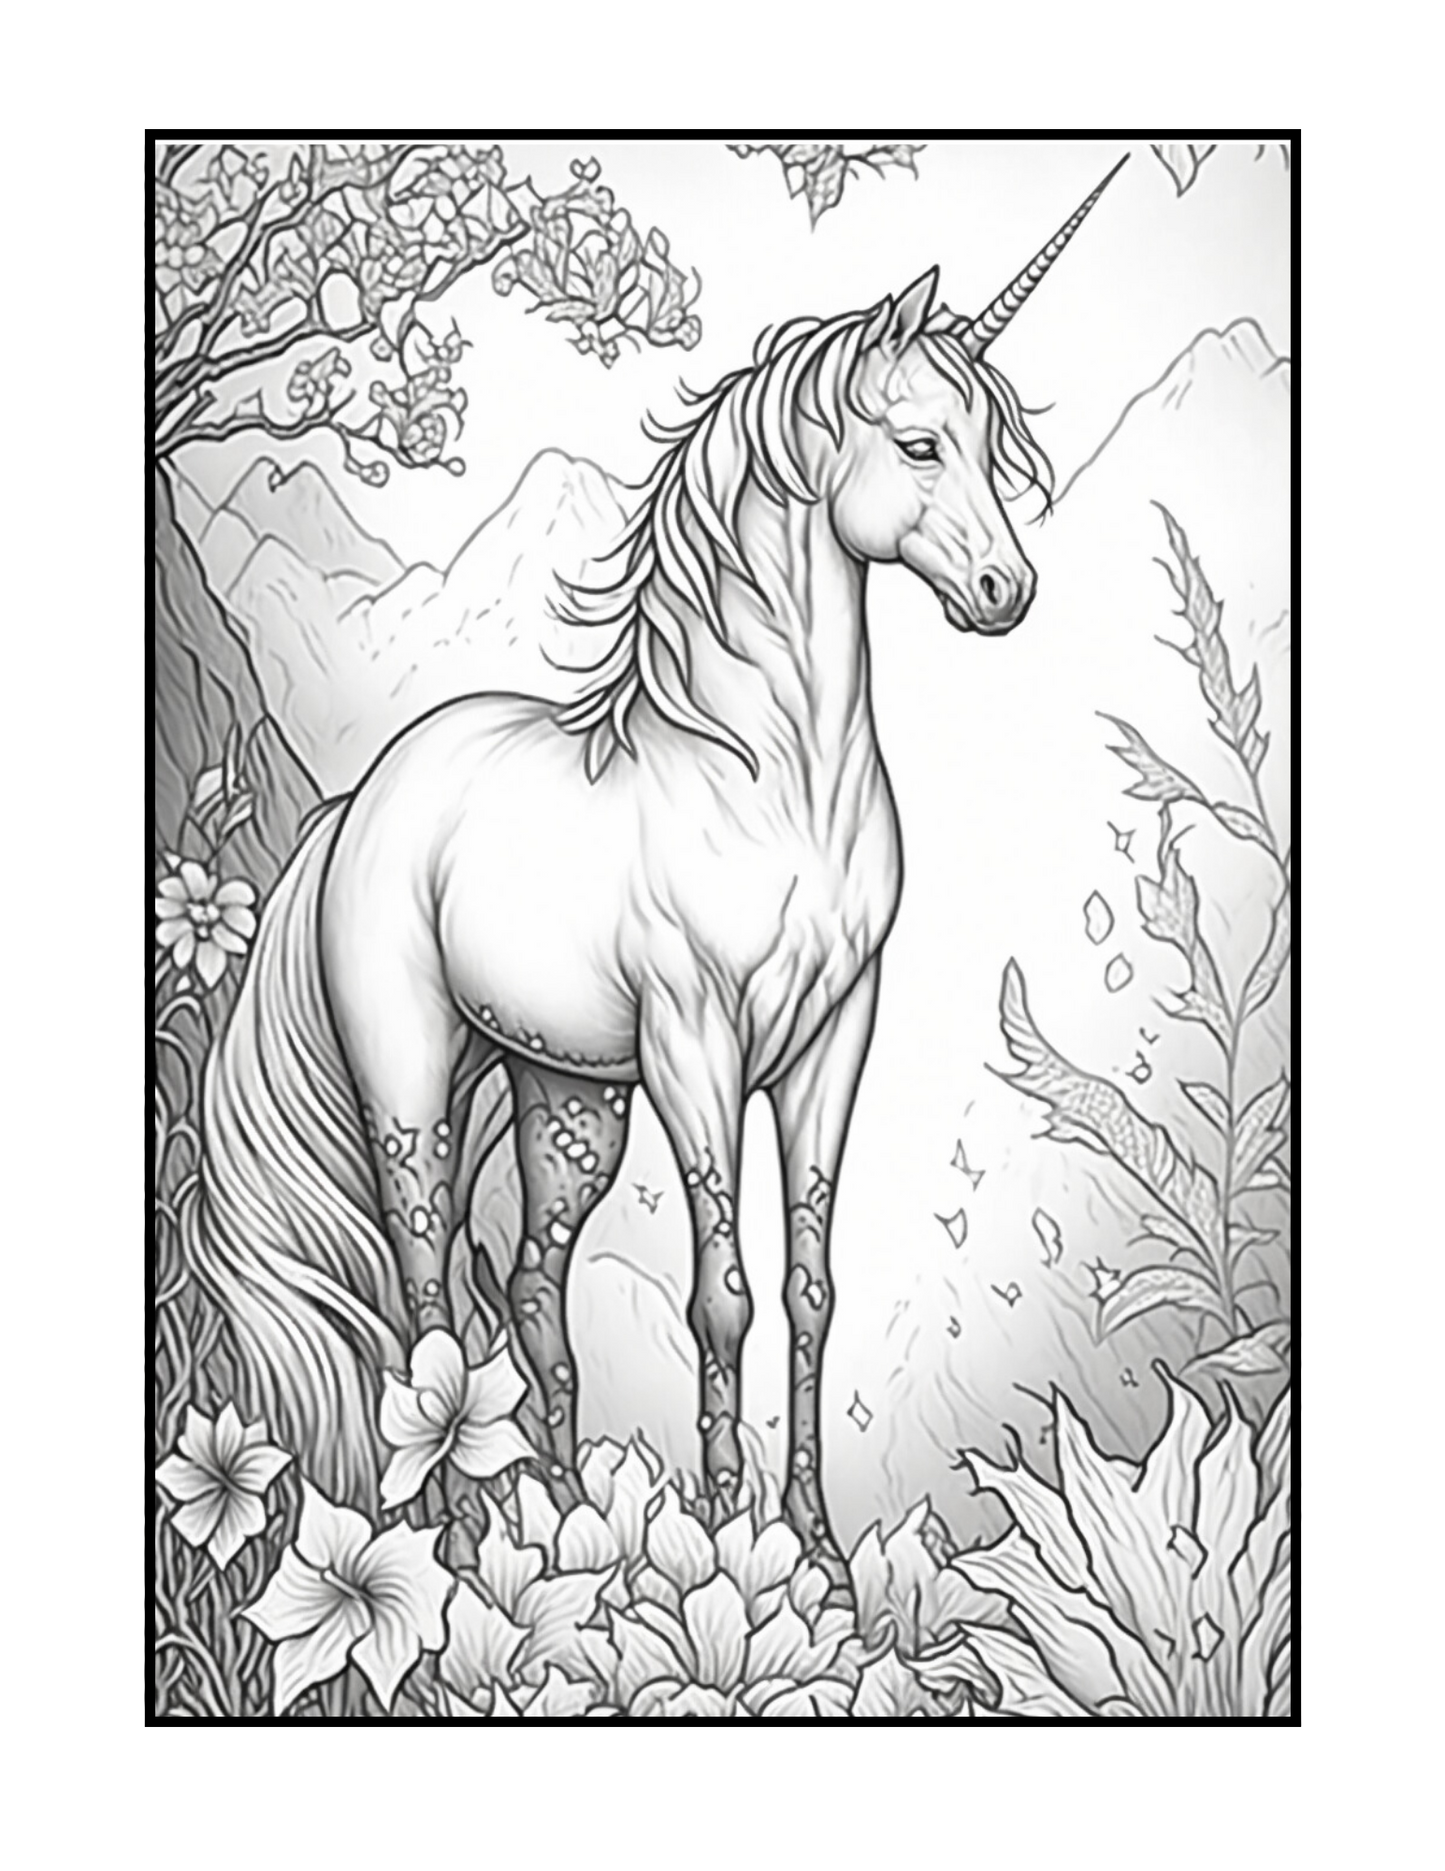 Mythical Creatures: An Adult Coloring Book for Anxiety and Mindfulness